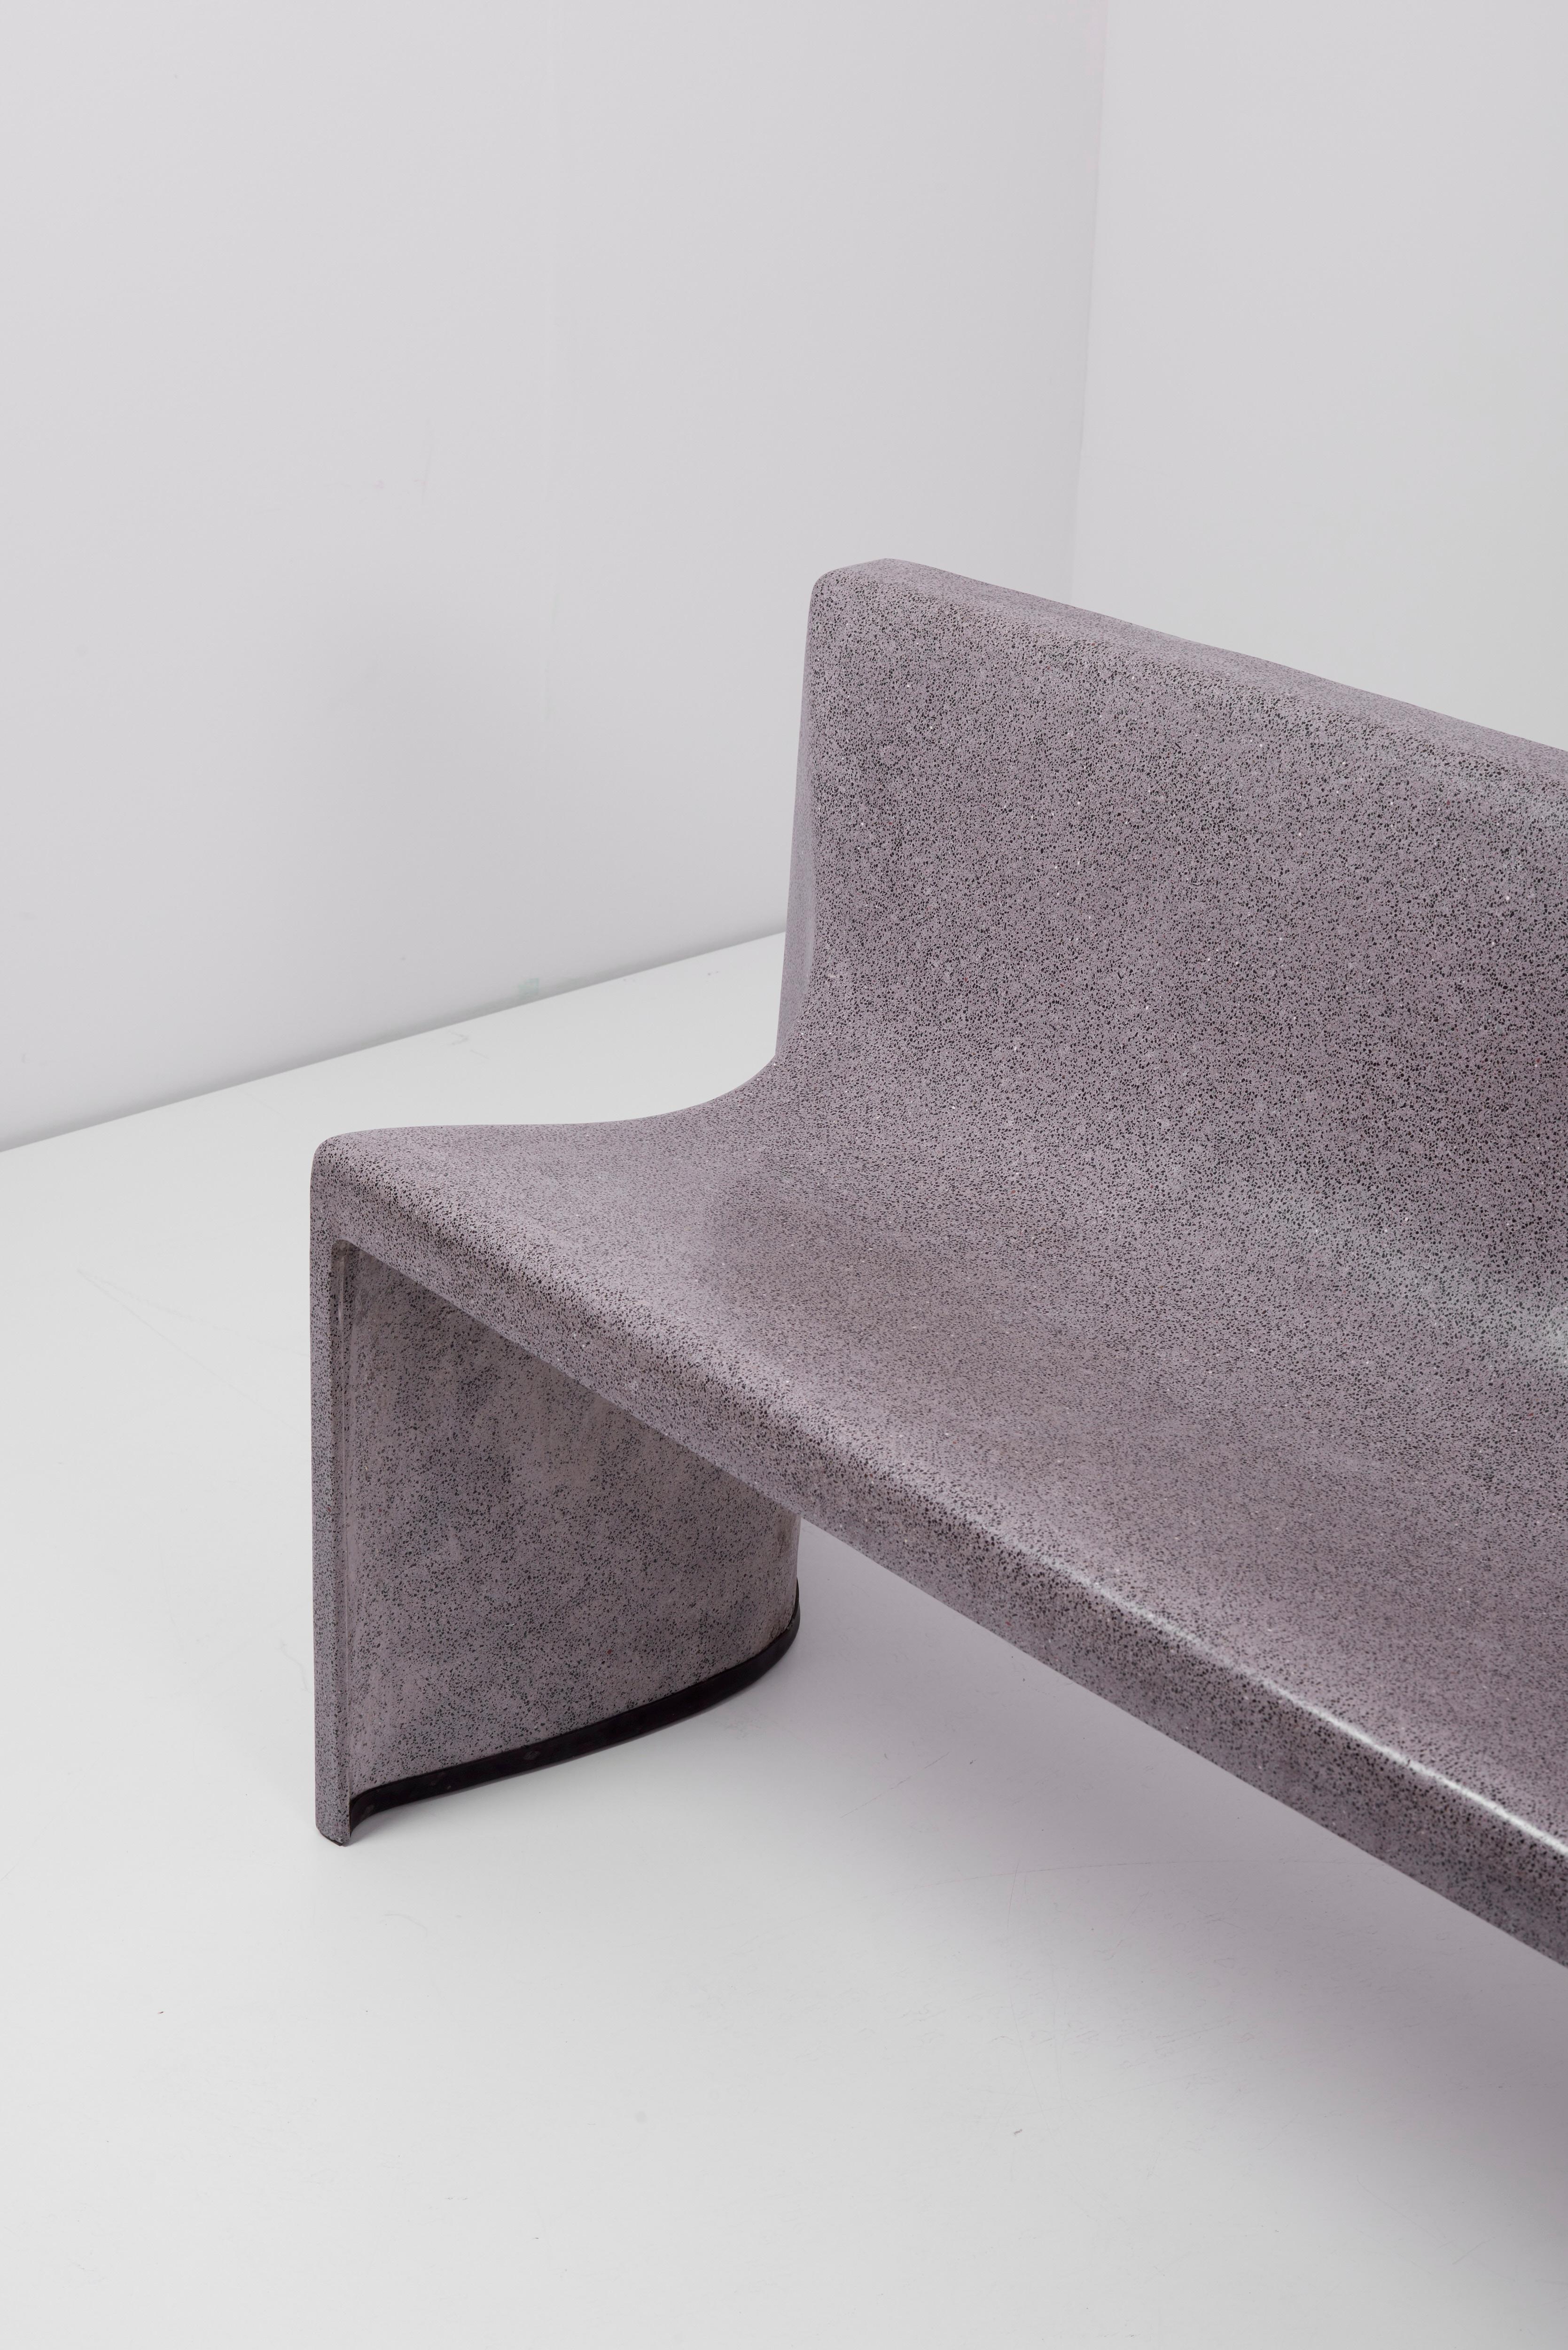 Architectural Concrete Bench by Martin Kleppe, Germany, circa 2011 For Sale 9